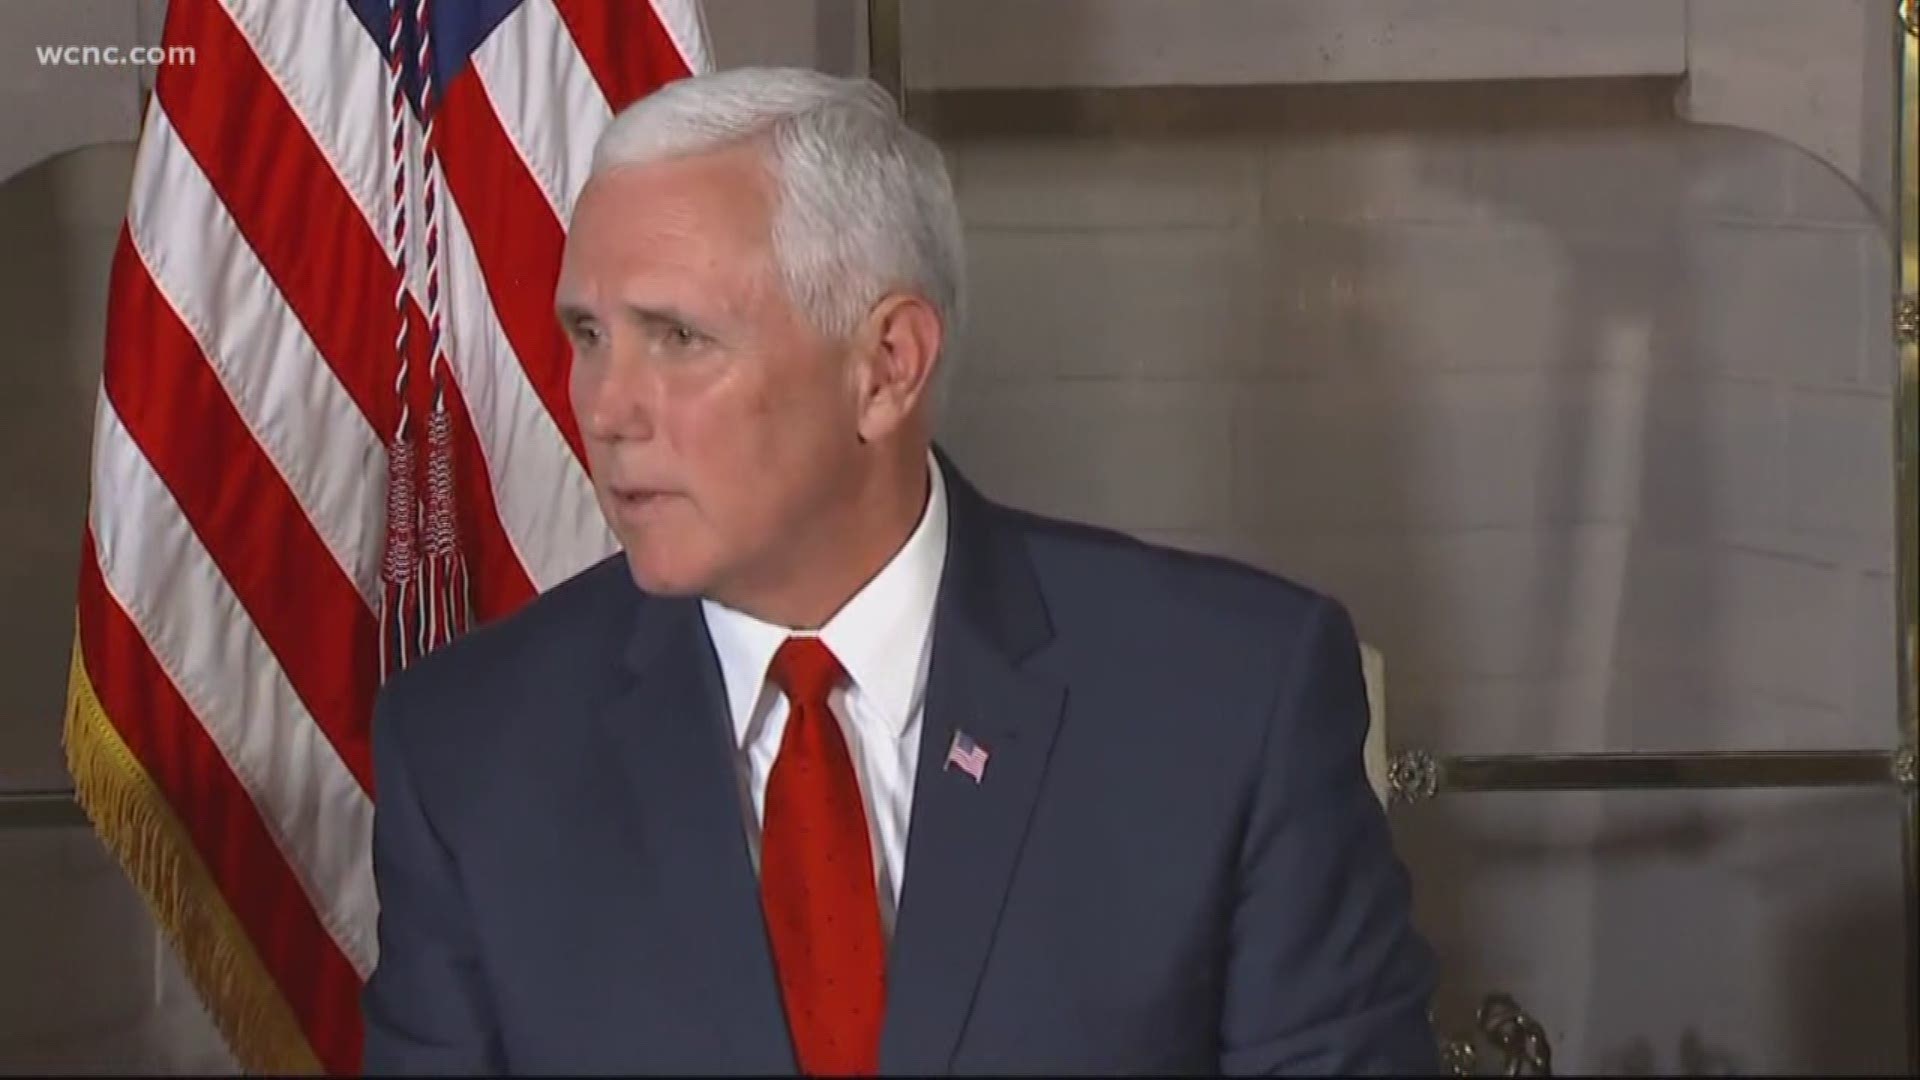 Vice President Mike Pence will spend the day in North Carolina, including an event with Congressman Robert Pittenger in Charlotte.